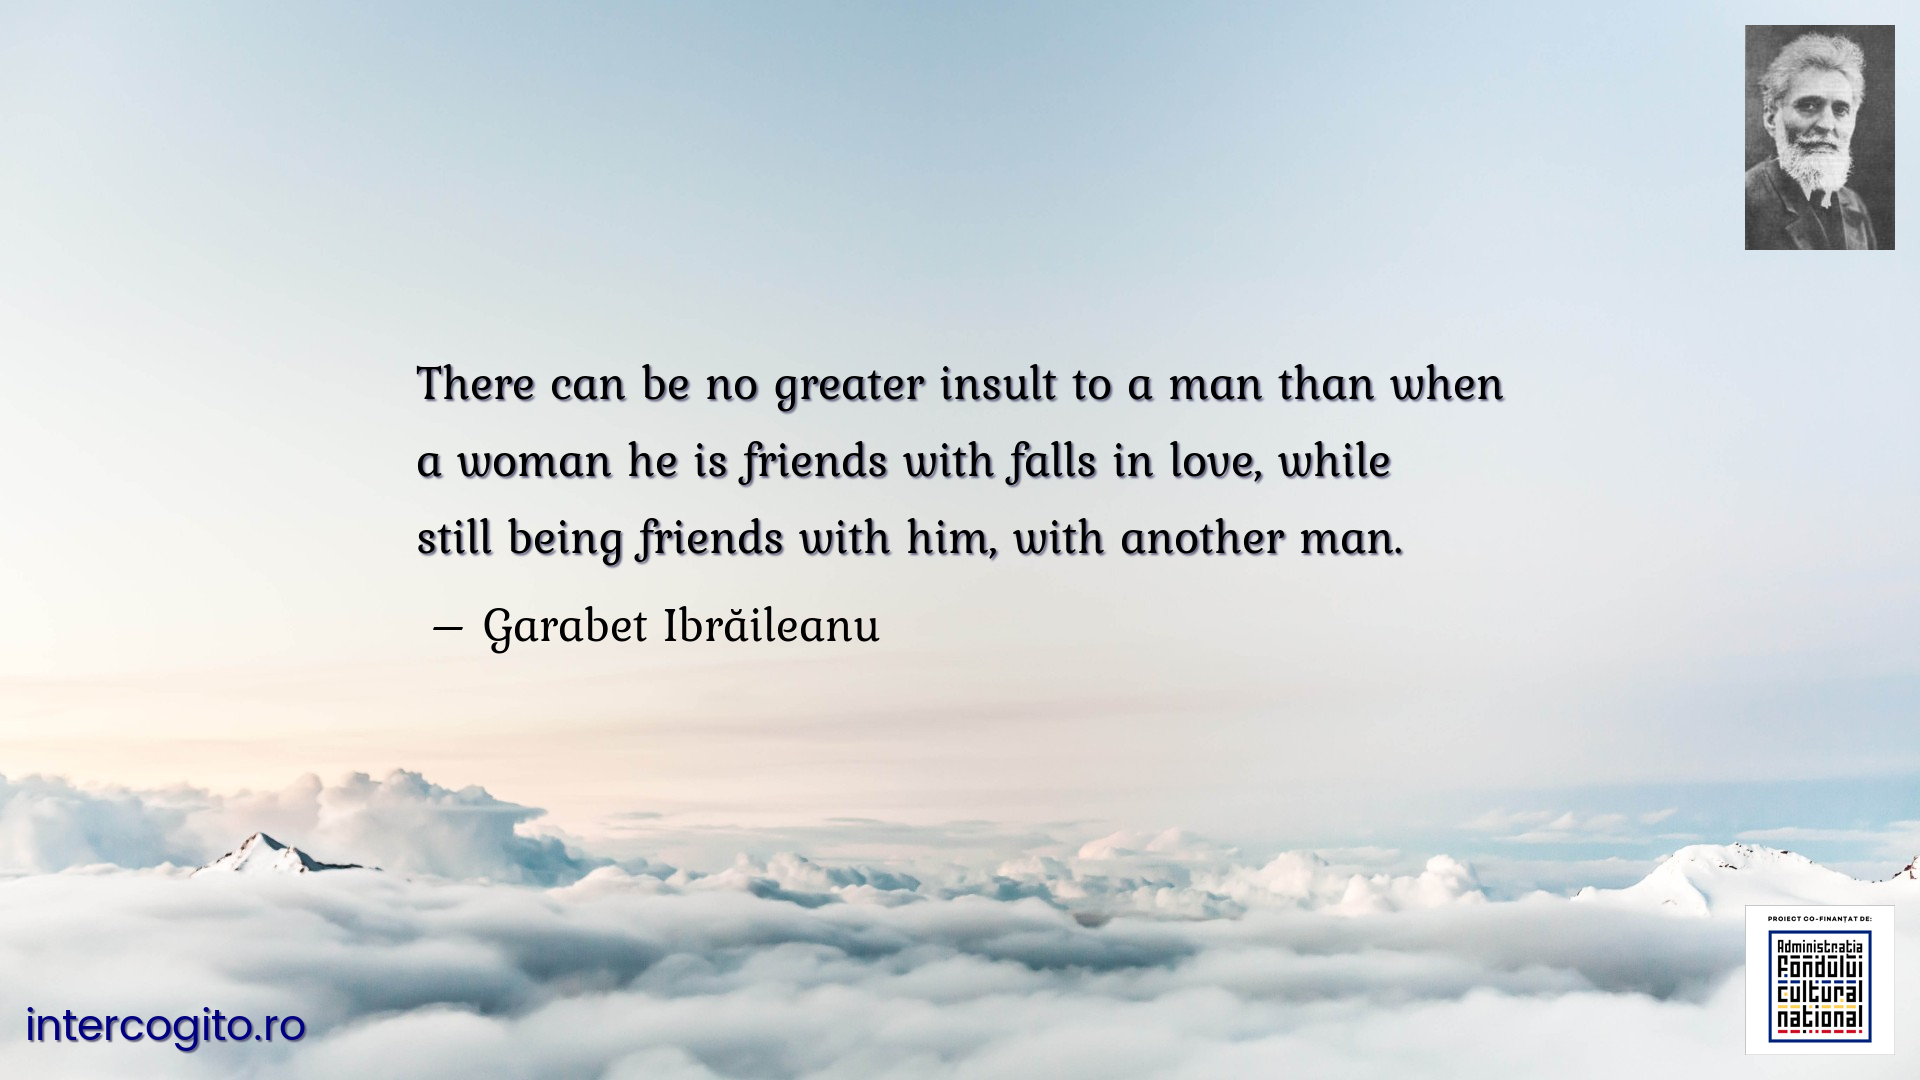 There can be no greater insult to a man than when a woman he is friends with falls in love, while still being friends with him, with another man.